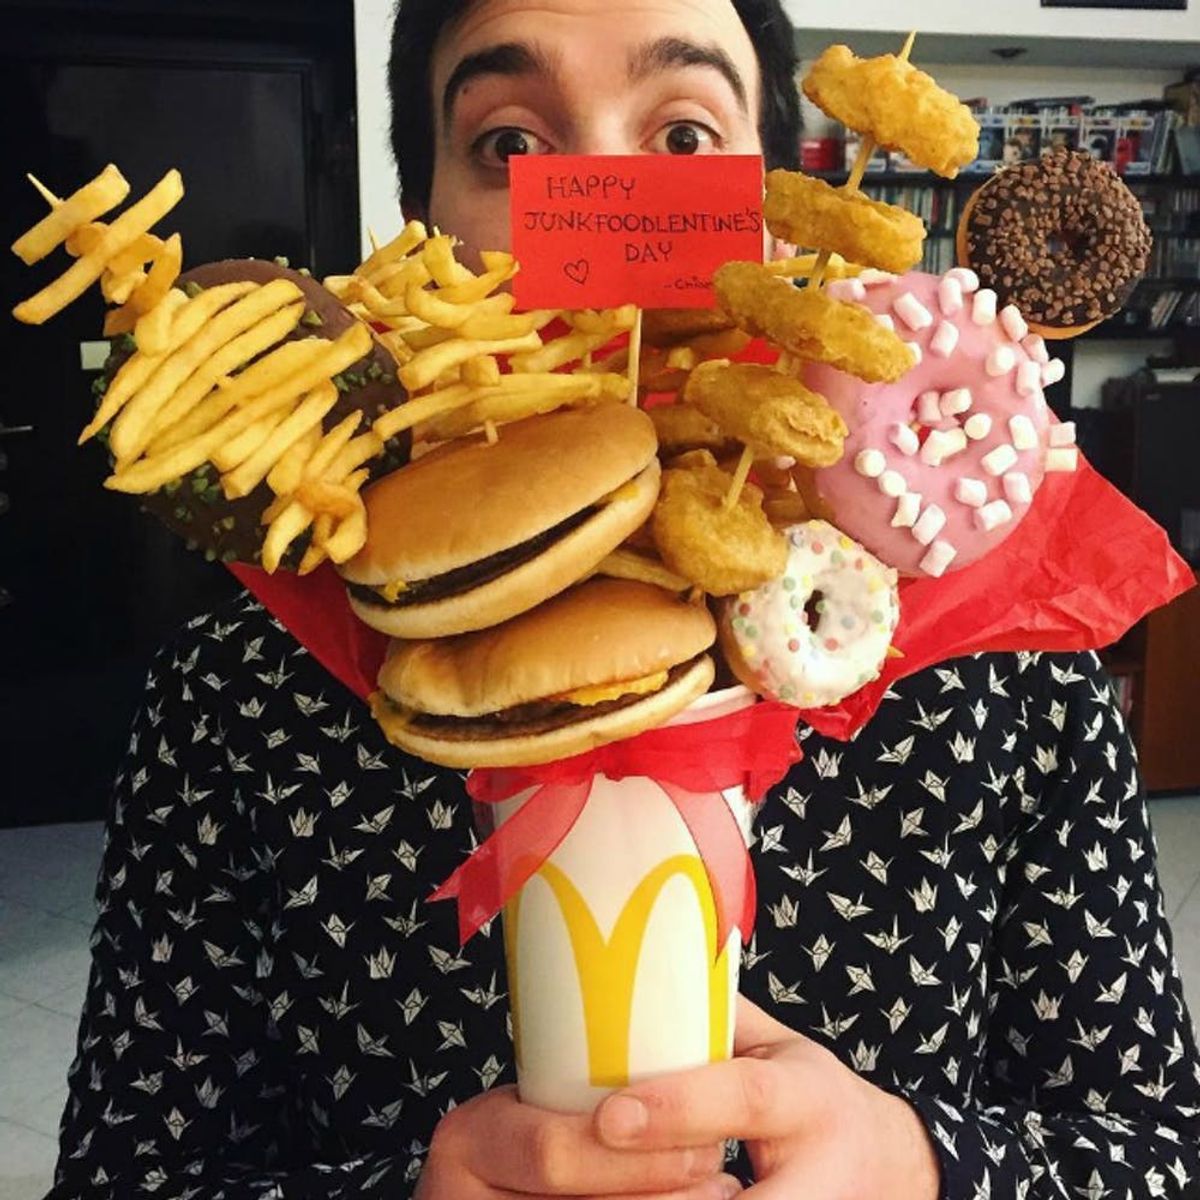 13 Craaaazy Instagrammers Using FOOD Bouquets to Say “I Love You”